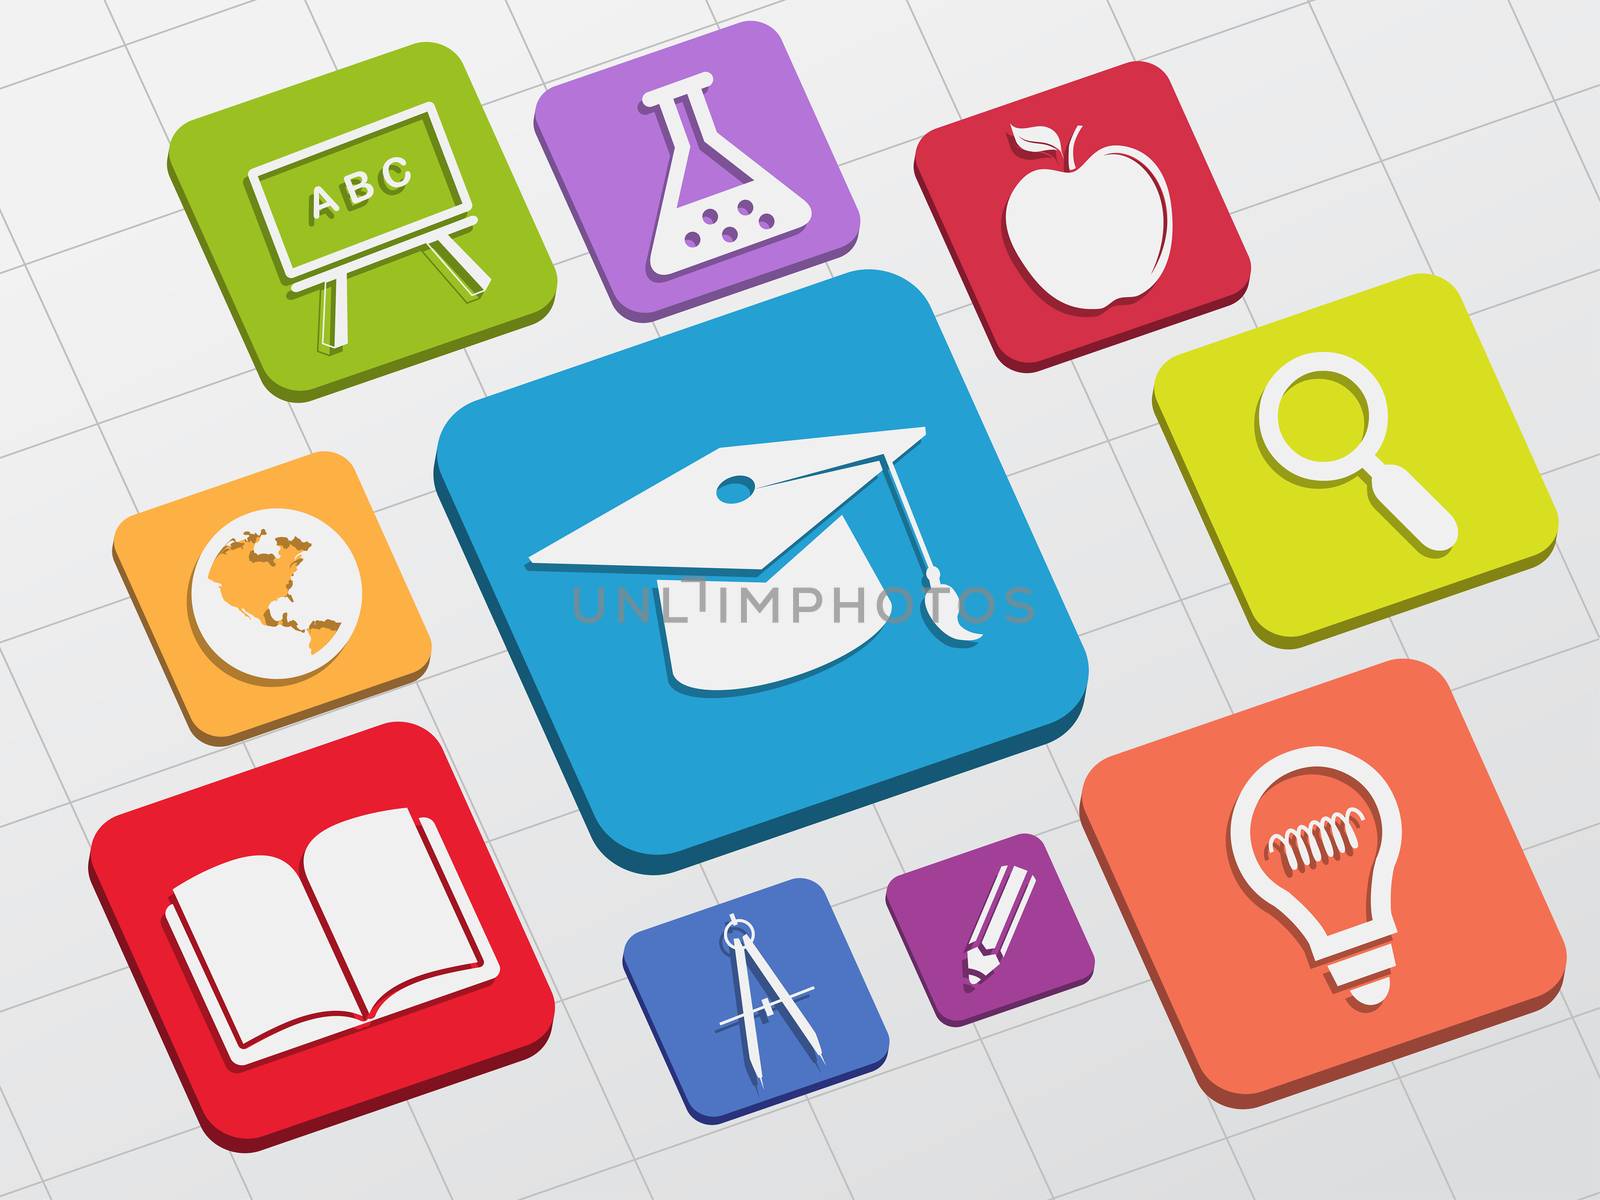 education signs - white symbols in colorful flat design blocks, learning concept icons